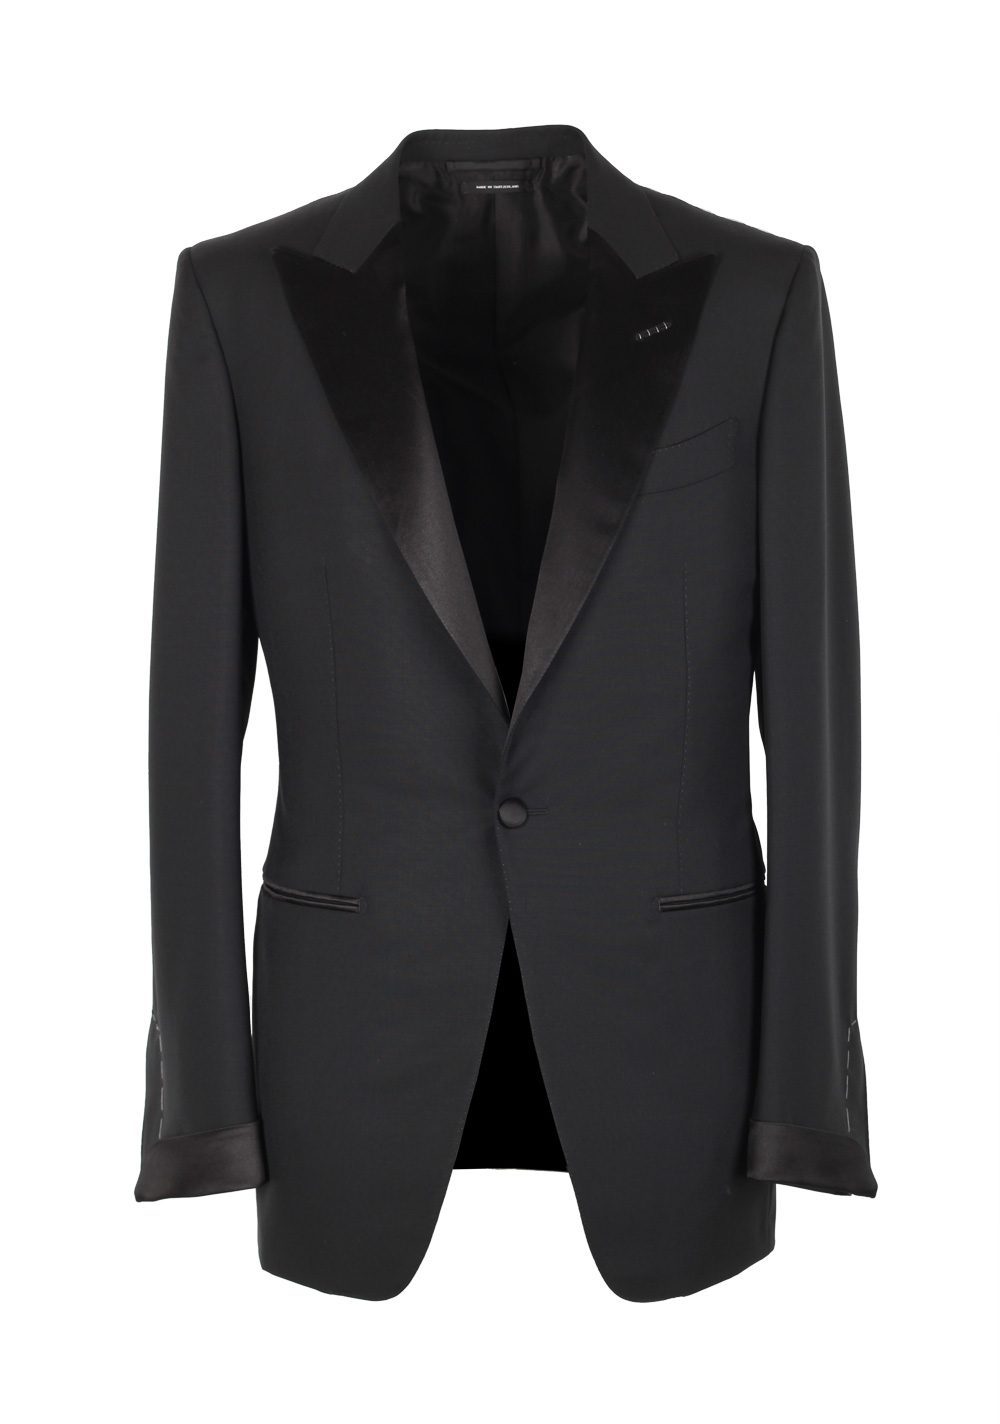 TOM FORD O'Connor Black Tuxedo Smoking Suit Size 54 / 44R U.S. Fit Y ...